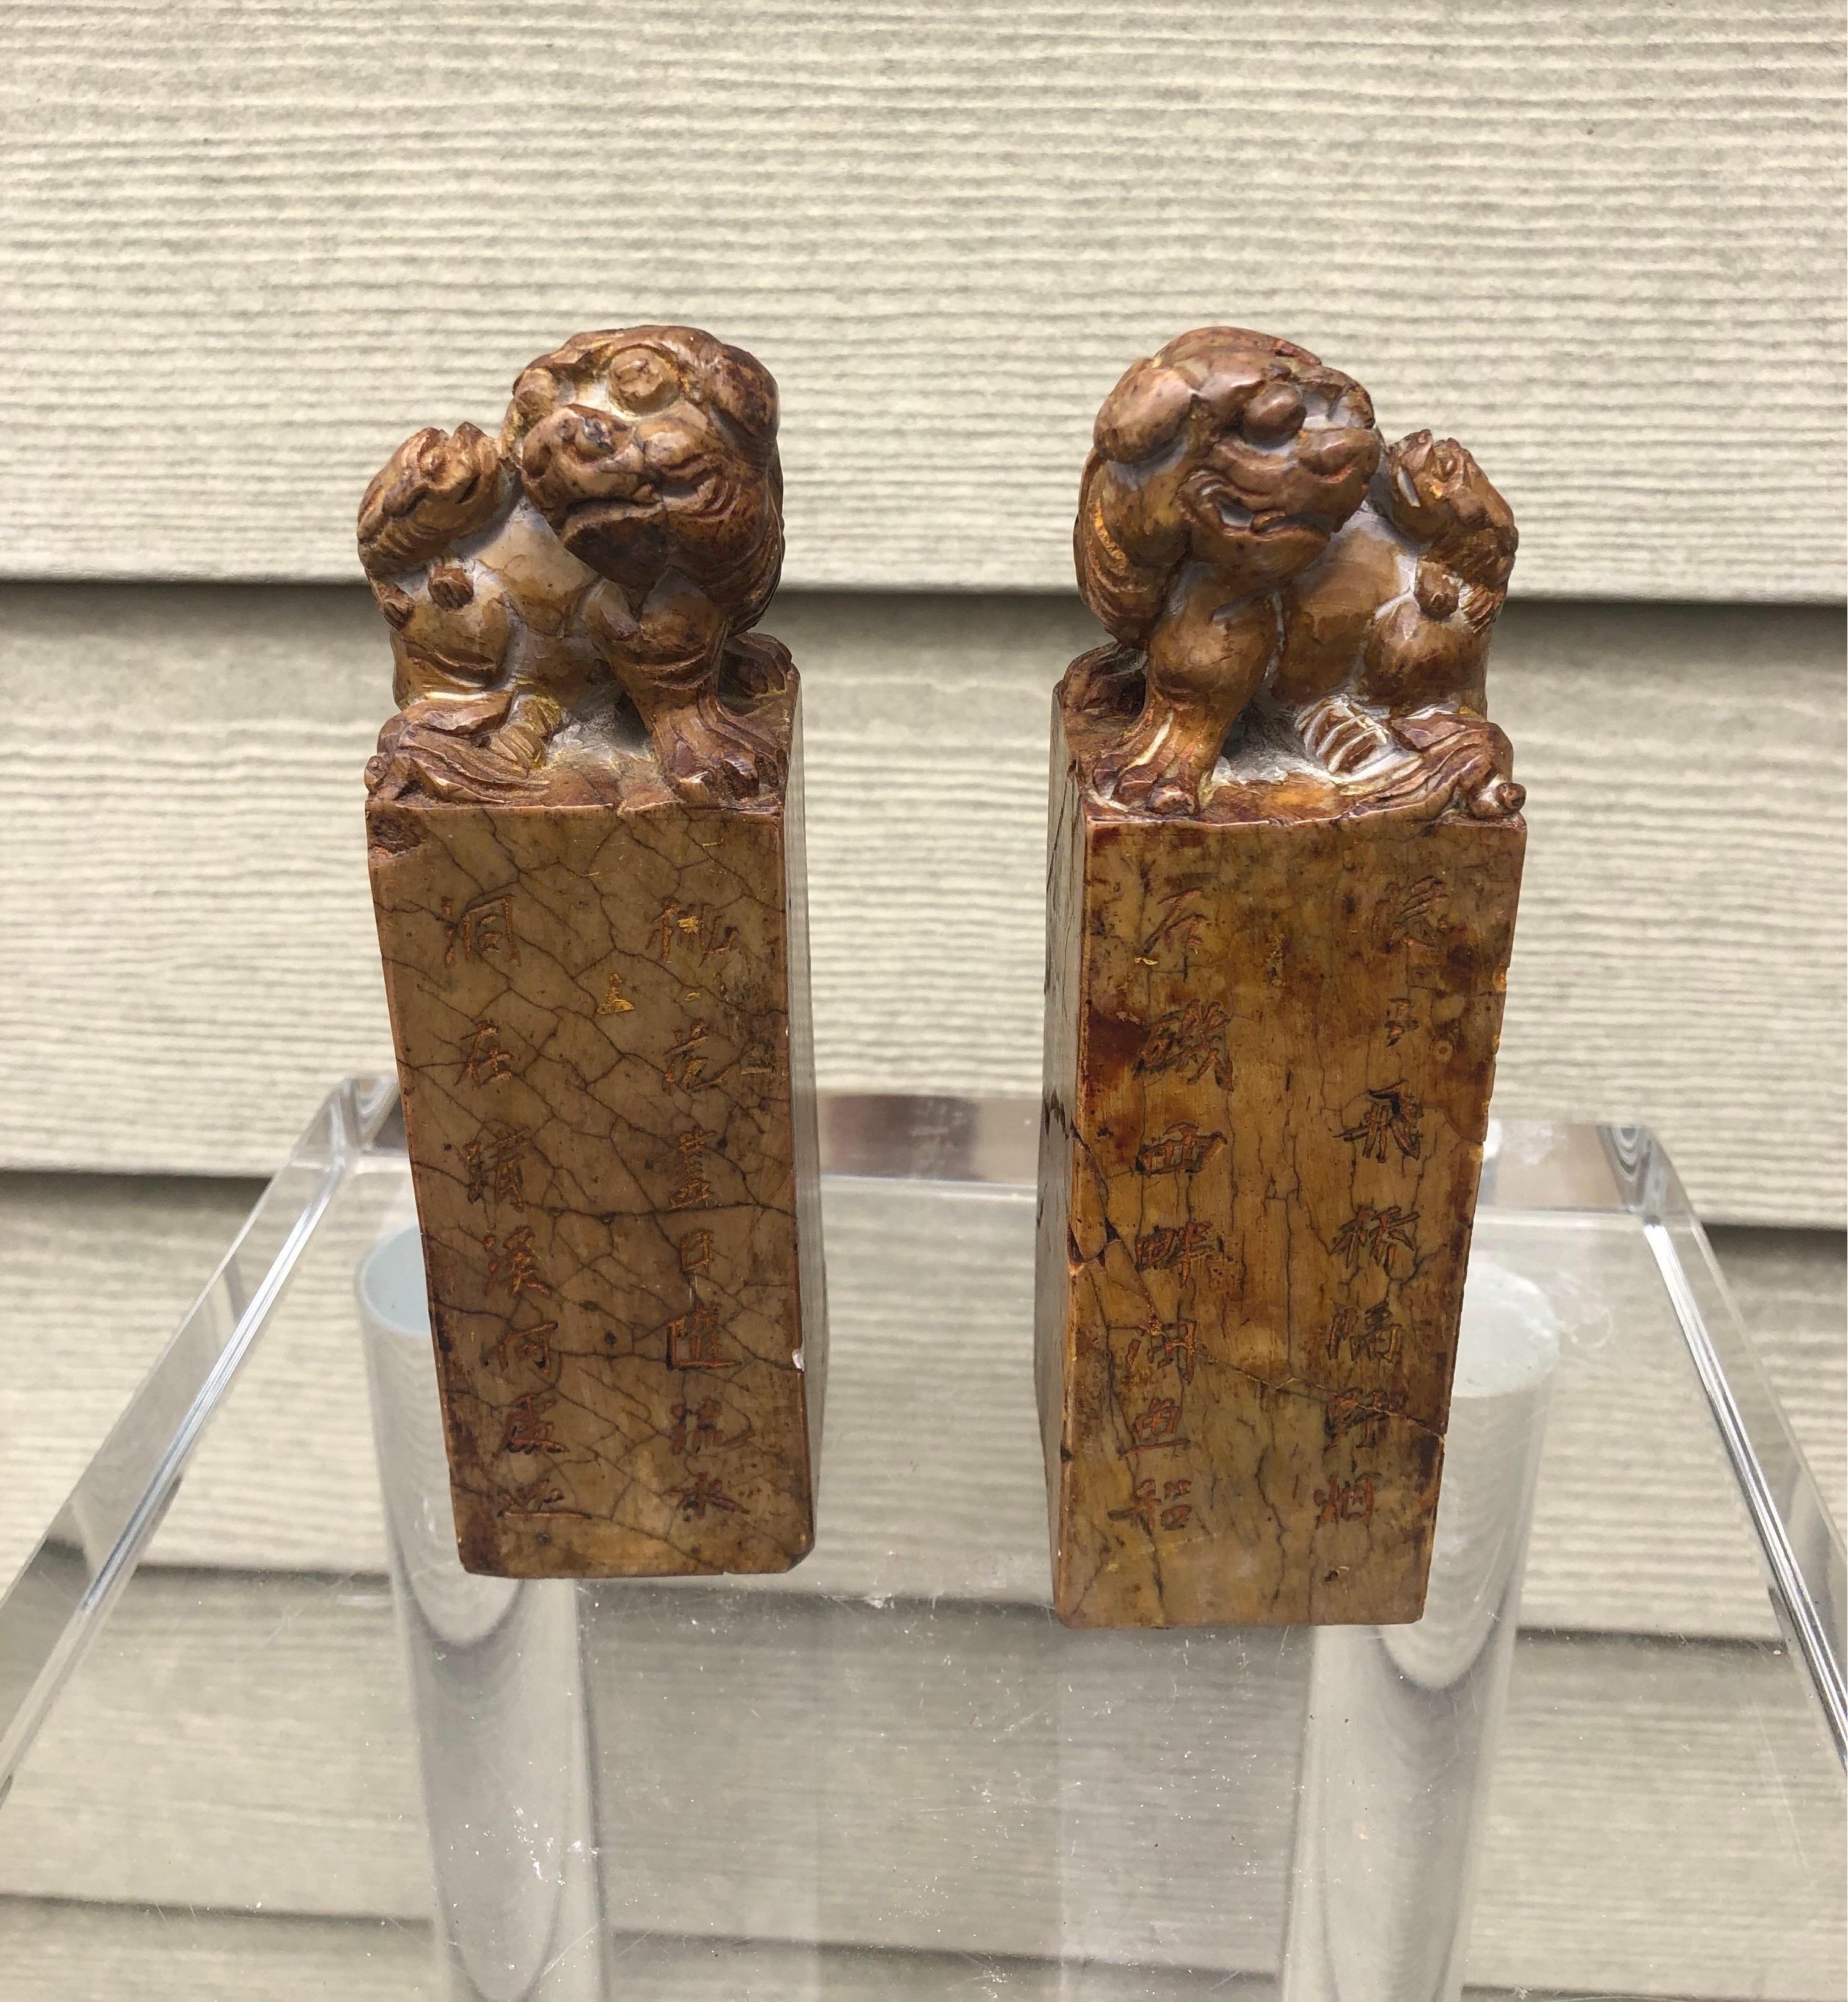 Great pair of Chinese seals from the late 19th-early 20th century with bixies on top and characters on sides and bottom.